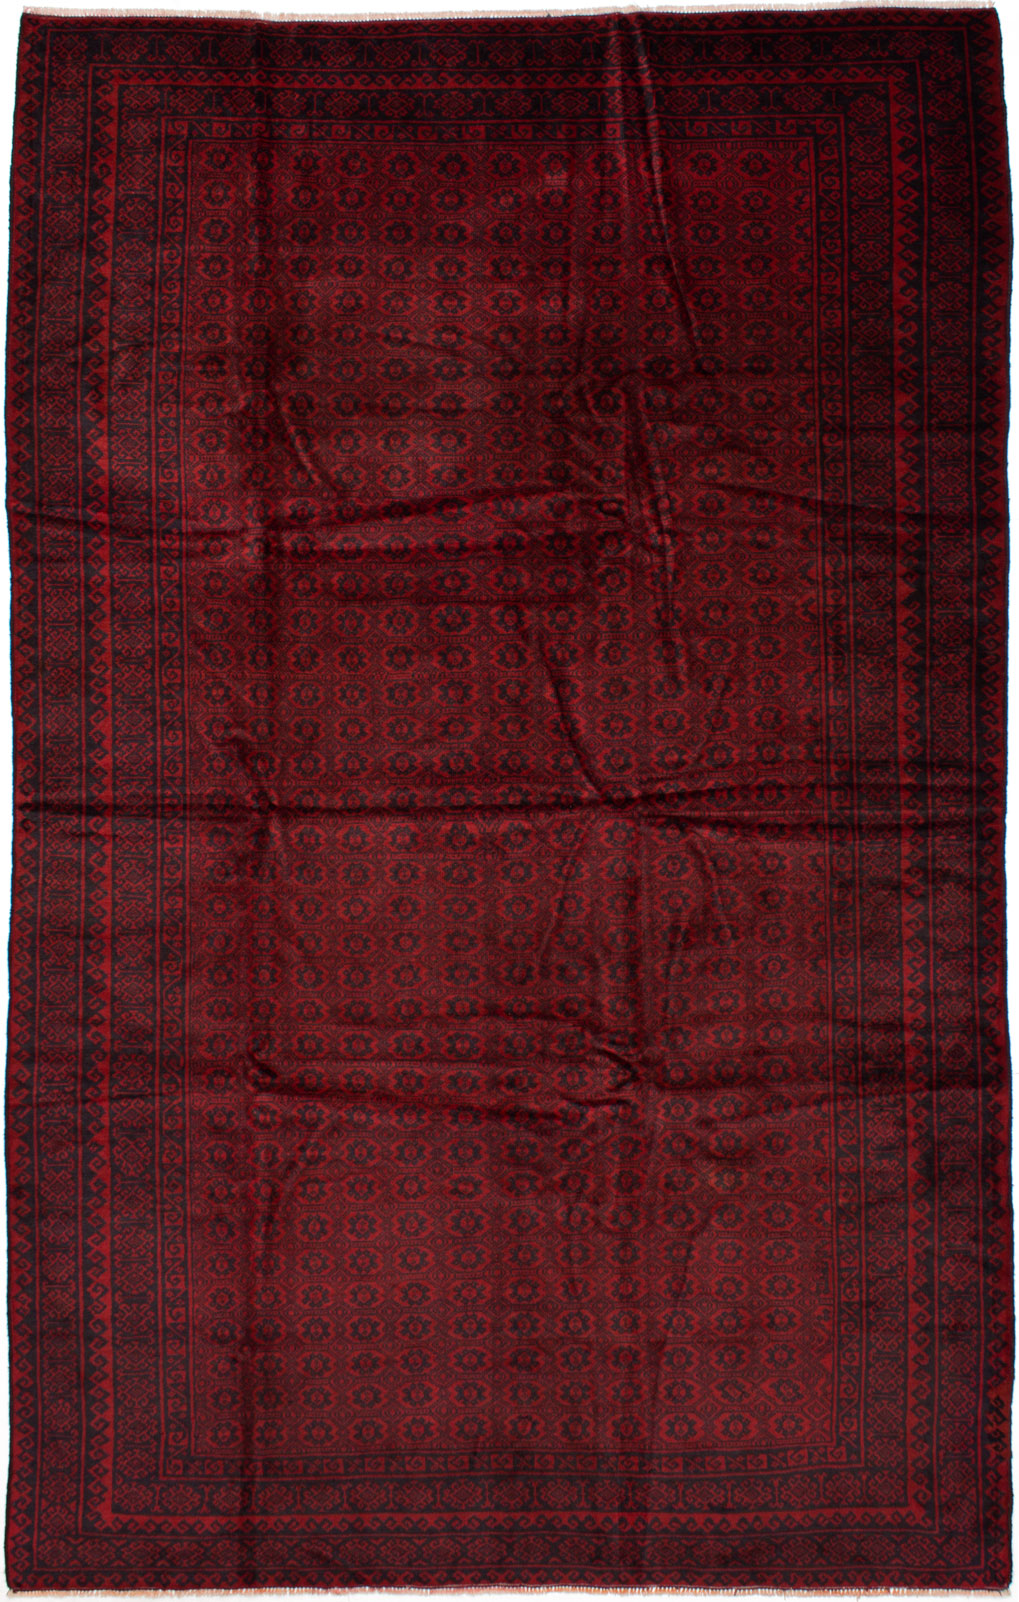 Hand-knotted Royal Baluch Dark Red Wool Rug 7'5" x 11'8" Size: 7'5" x 11'8"  